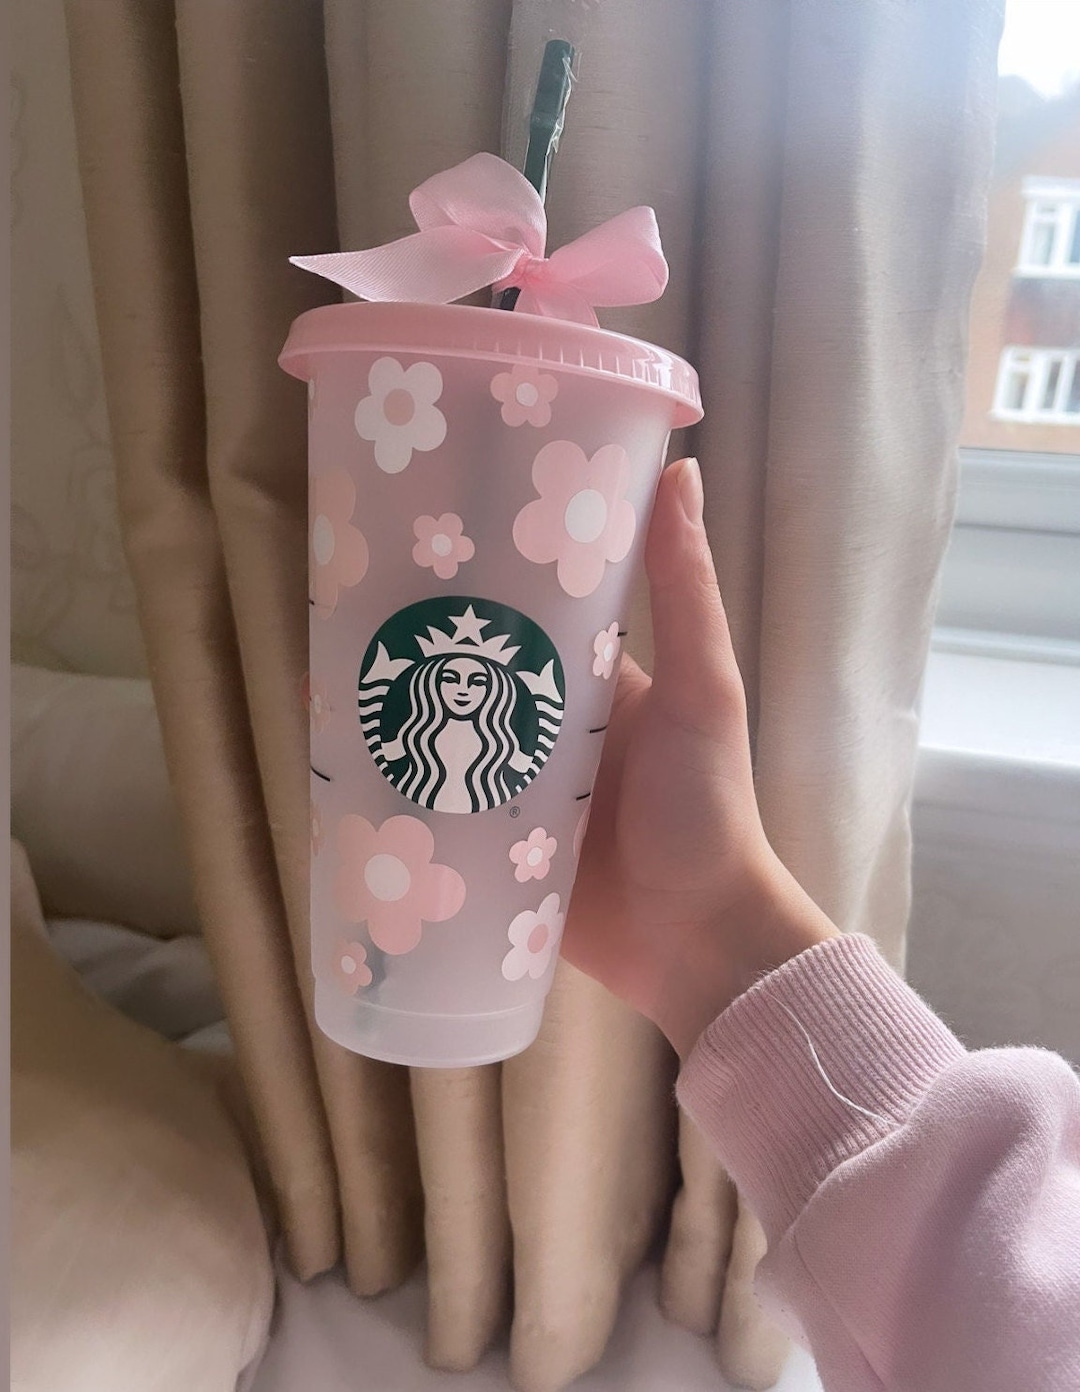 Retro Flowers Starbucks Cup Pink Flowers Cold Cup 70s 